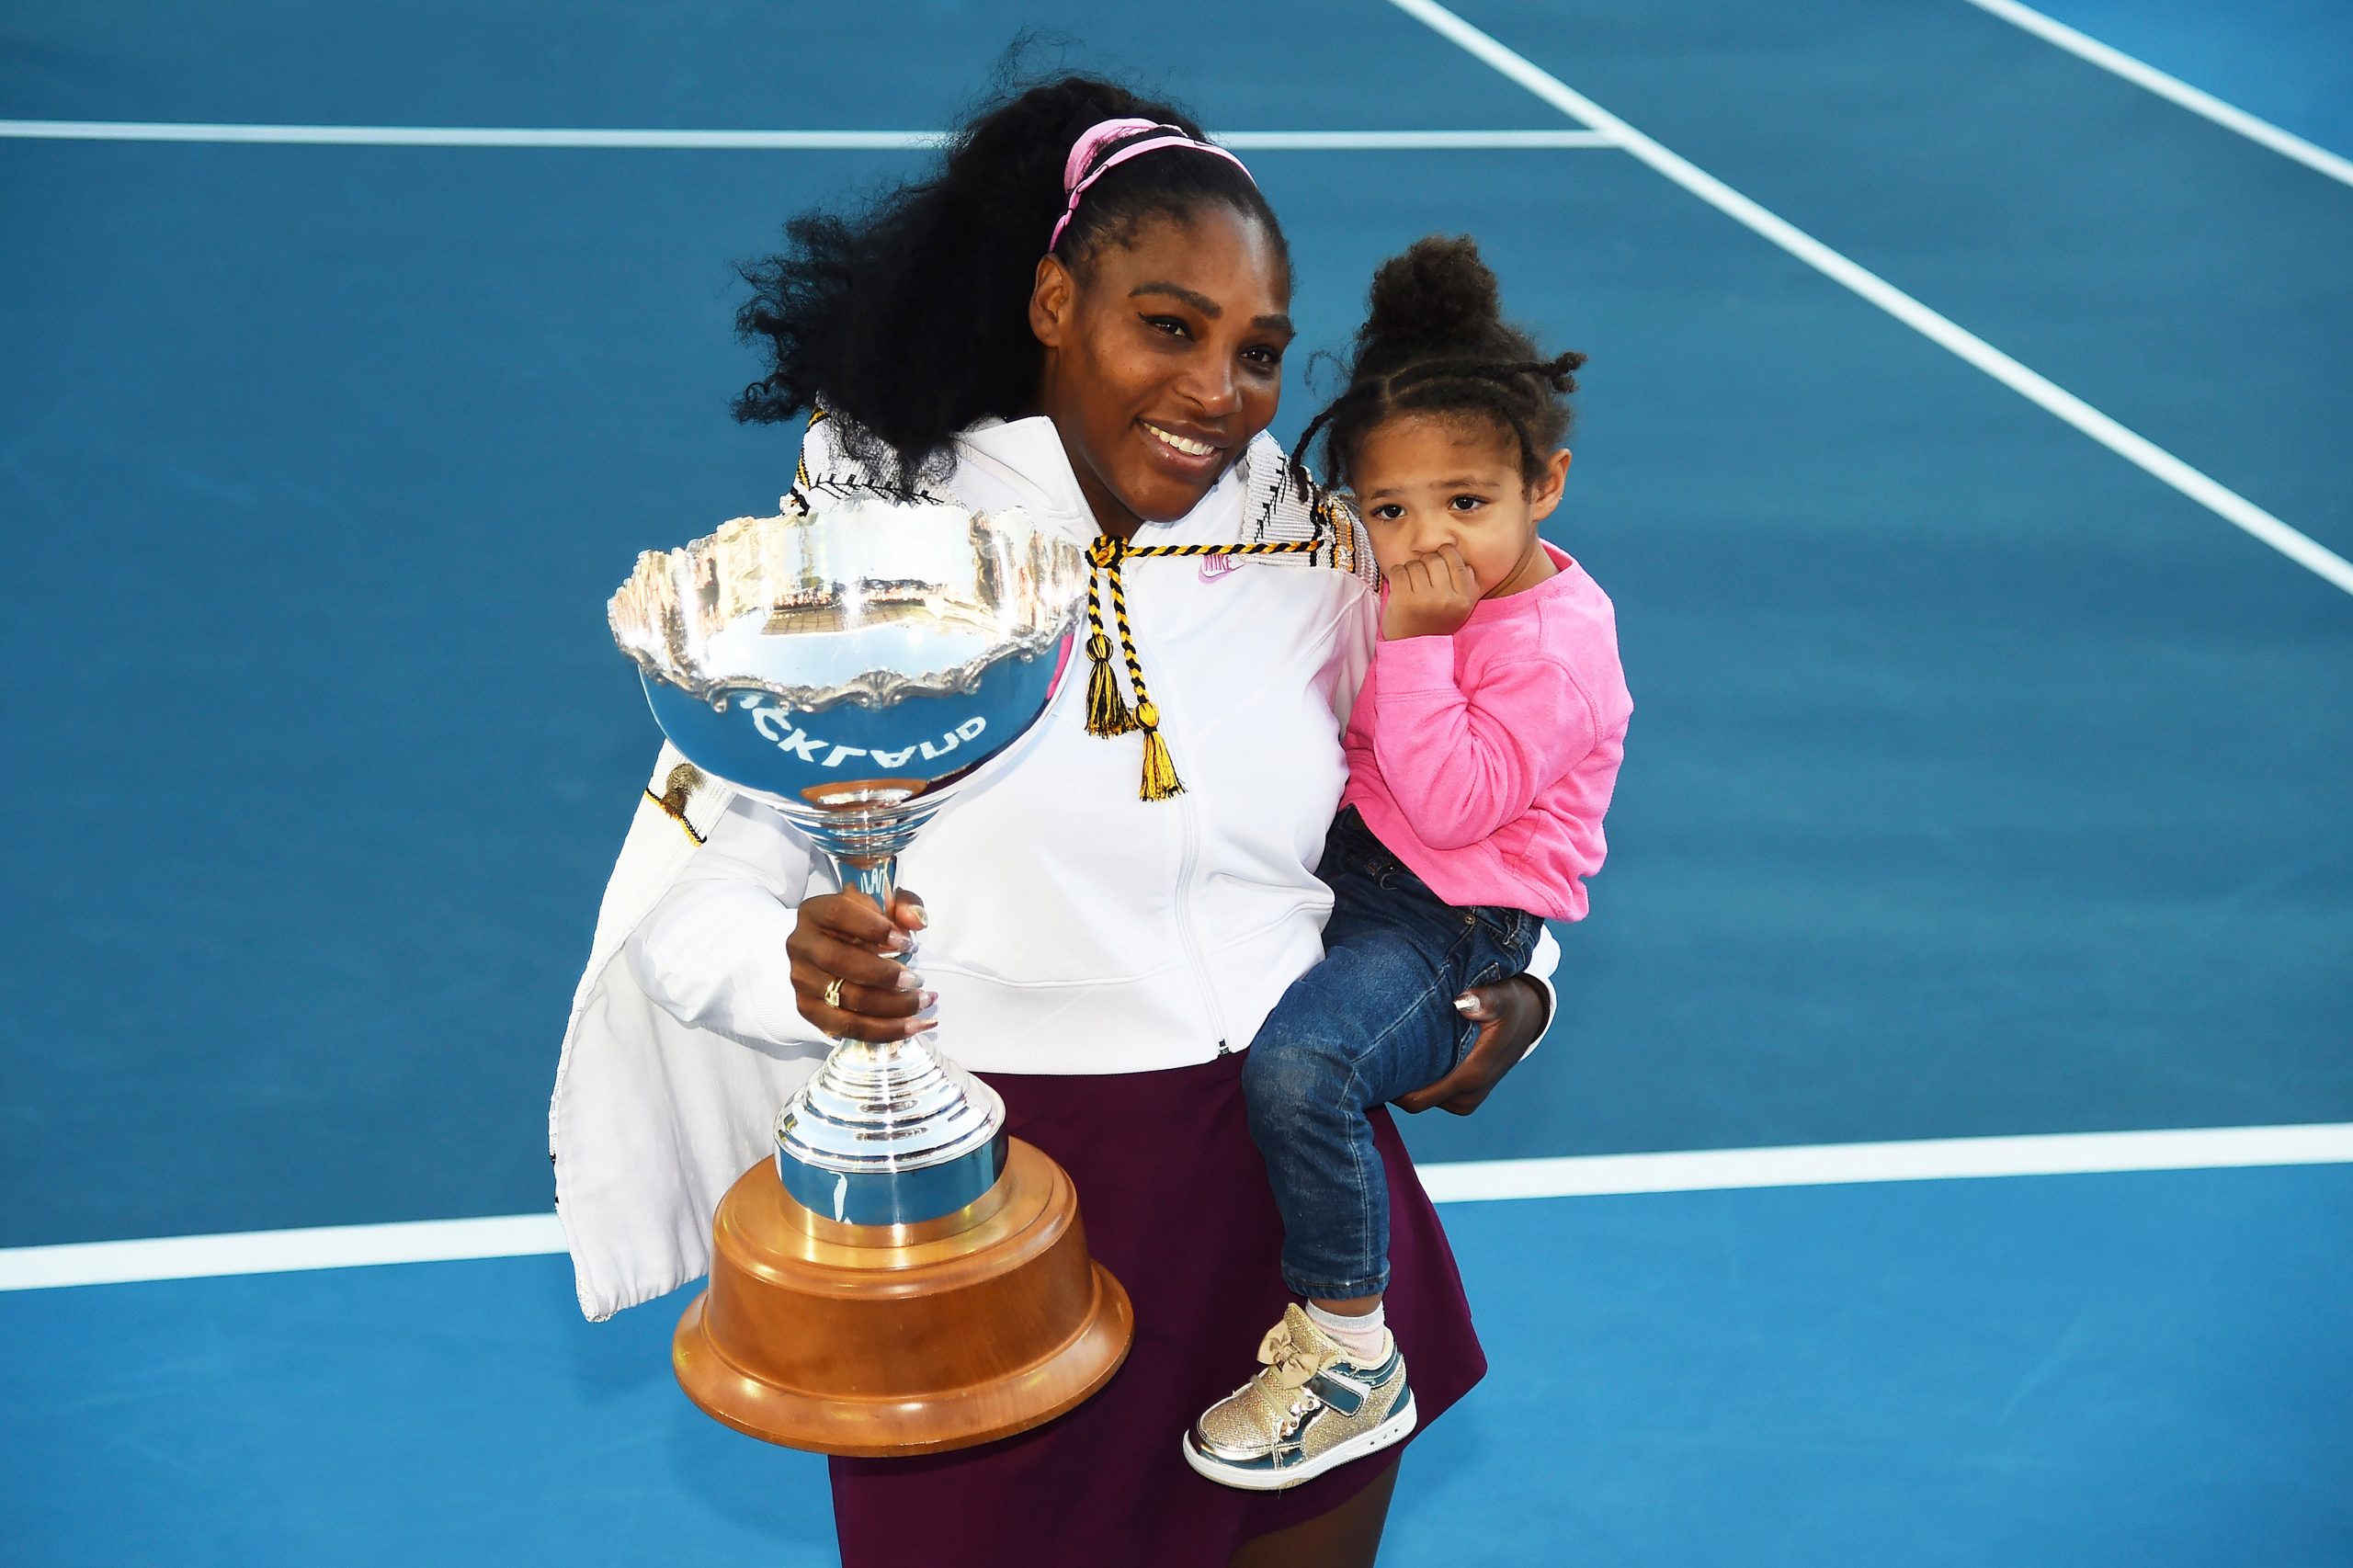 Serena Williams: Her legacy and impact on tennis